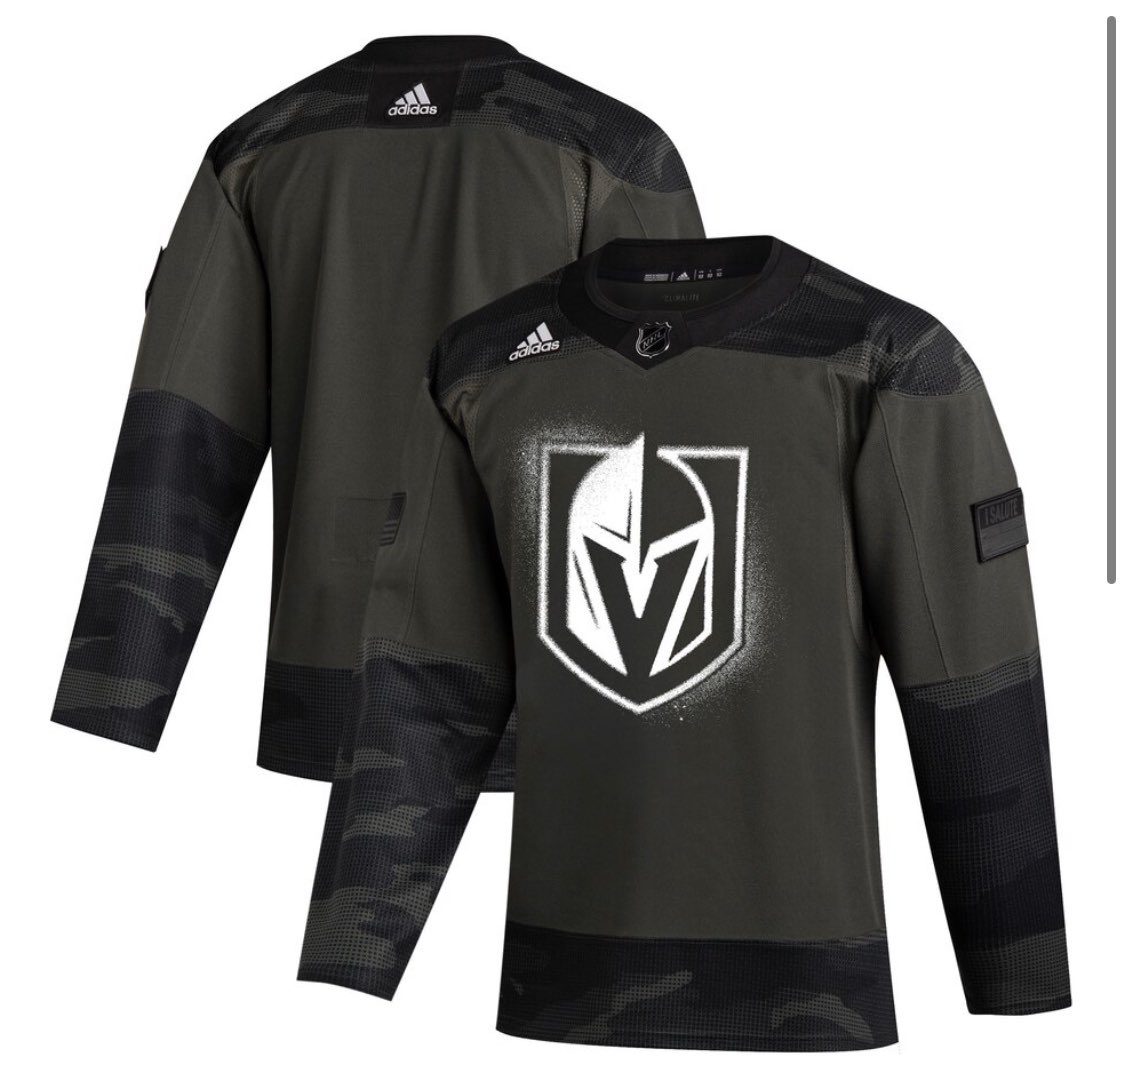 SinBin.vegas on X: Military Appreciation Night at T-Mobile Arena will be  on November 13th vs Chicago. VGK will wear these jerseys in warmups. / X